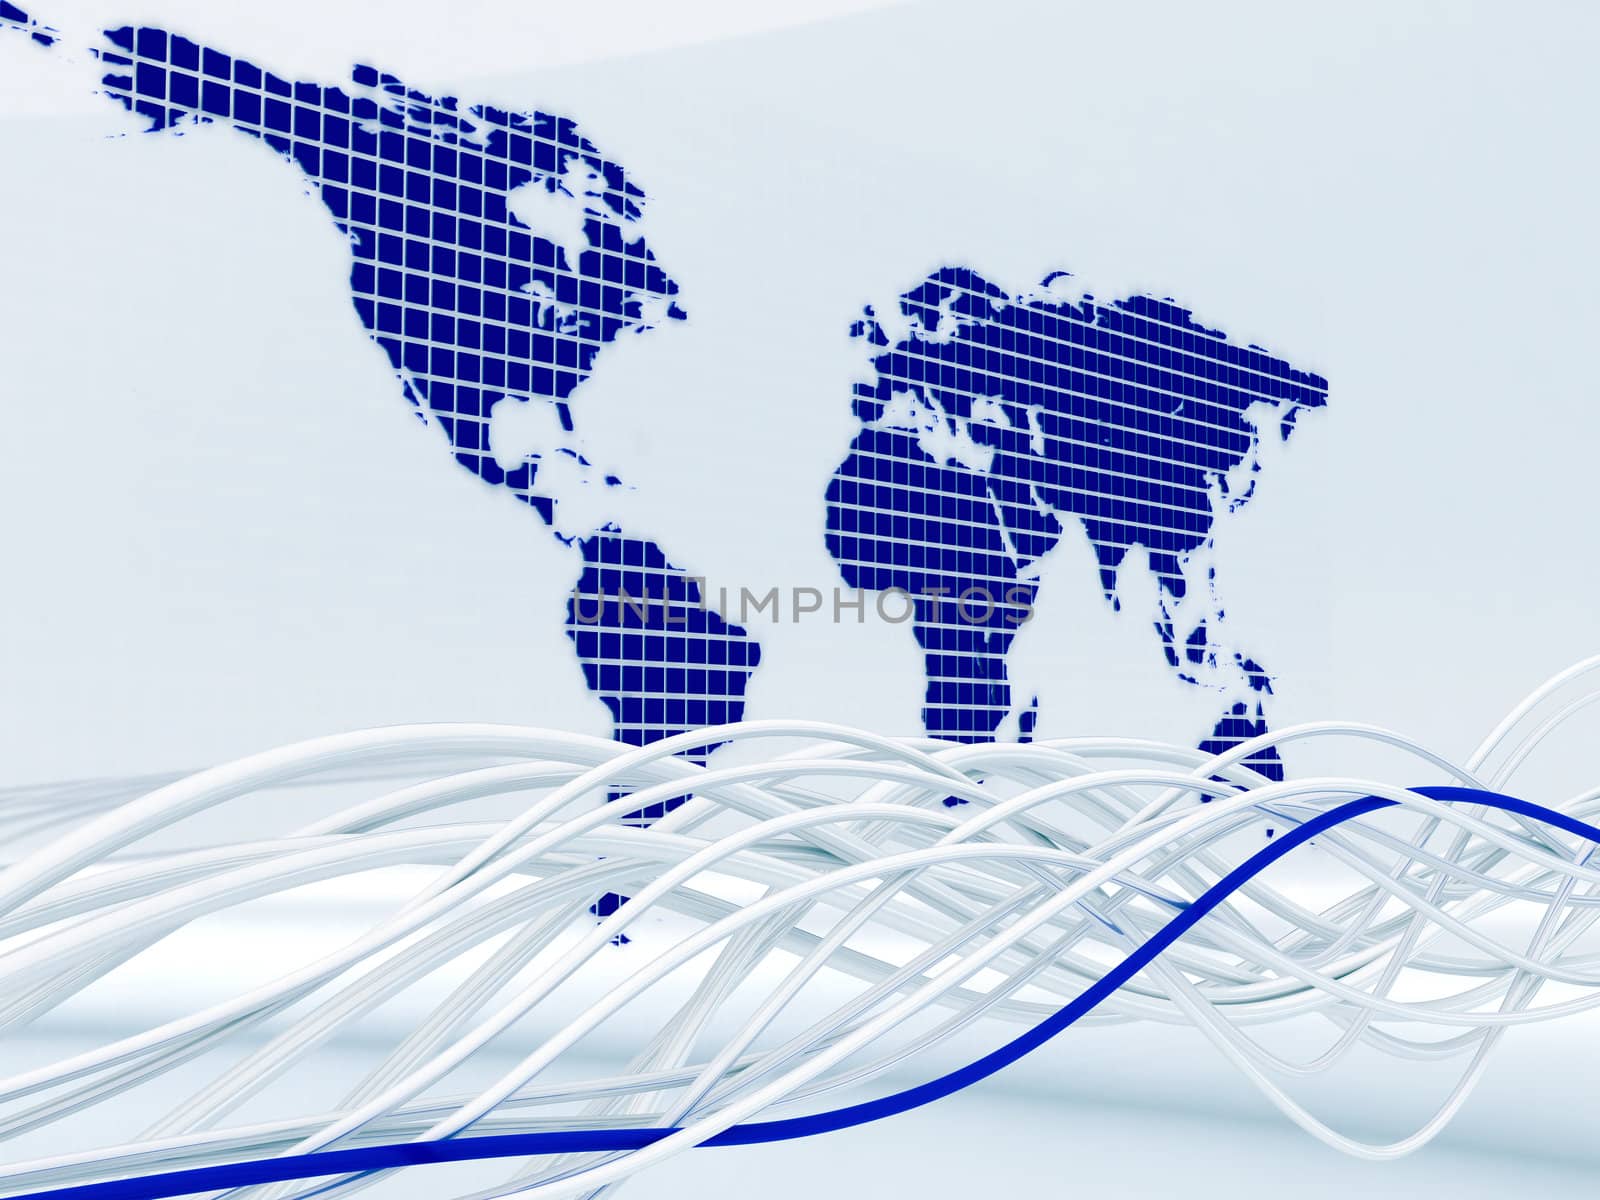 Concept on a theme of the global communications with the image of wires and of world map